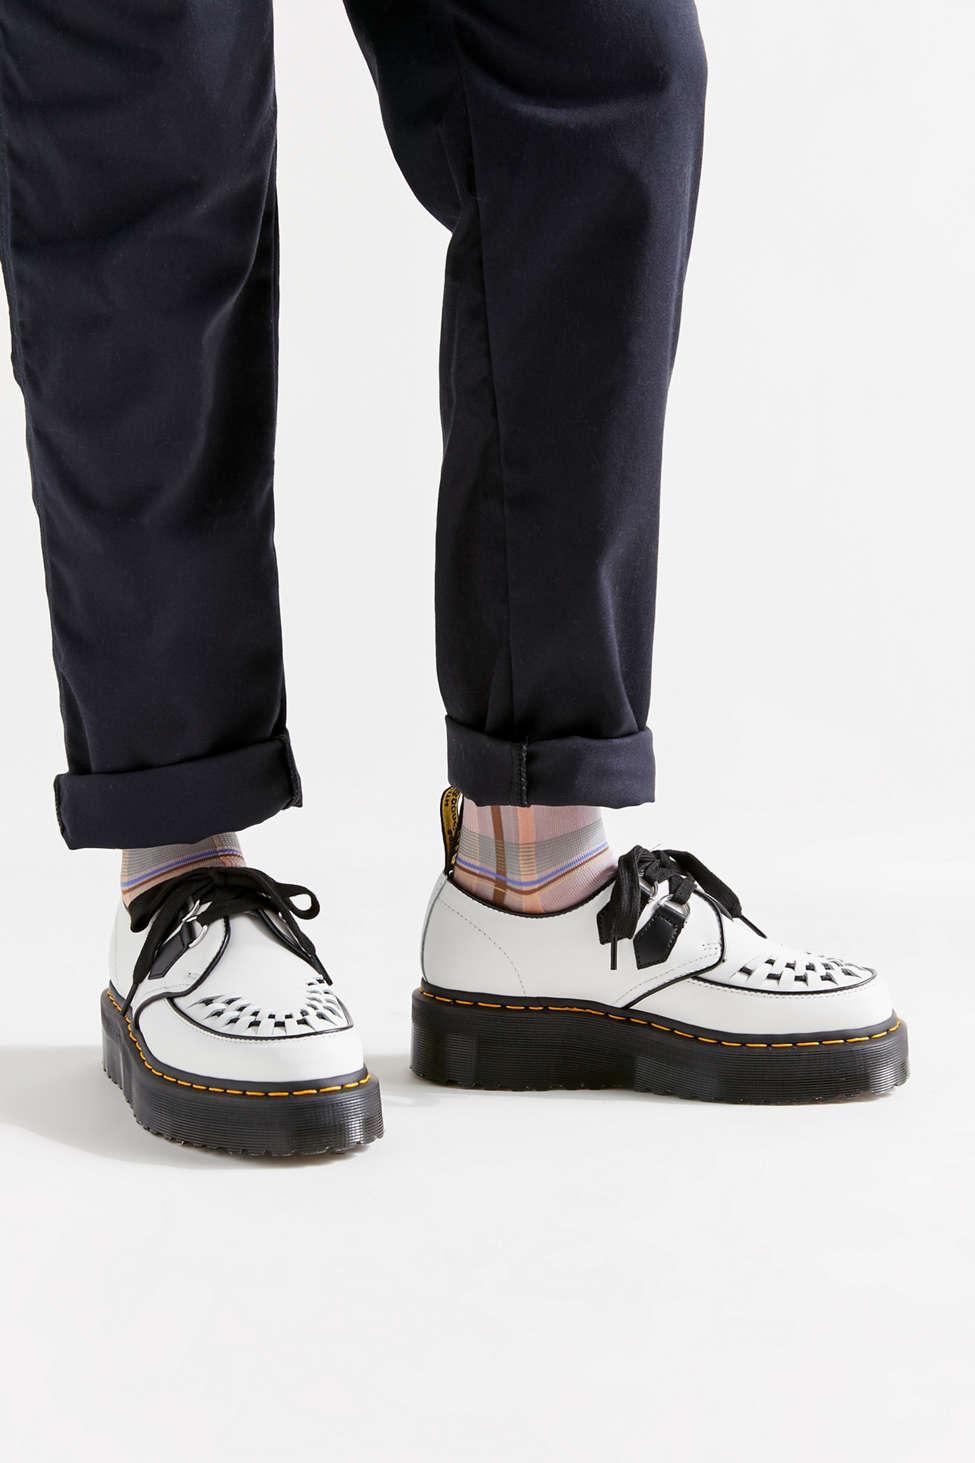 Sidney Leather Creeper Platform Shoes in White+Black